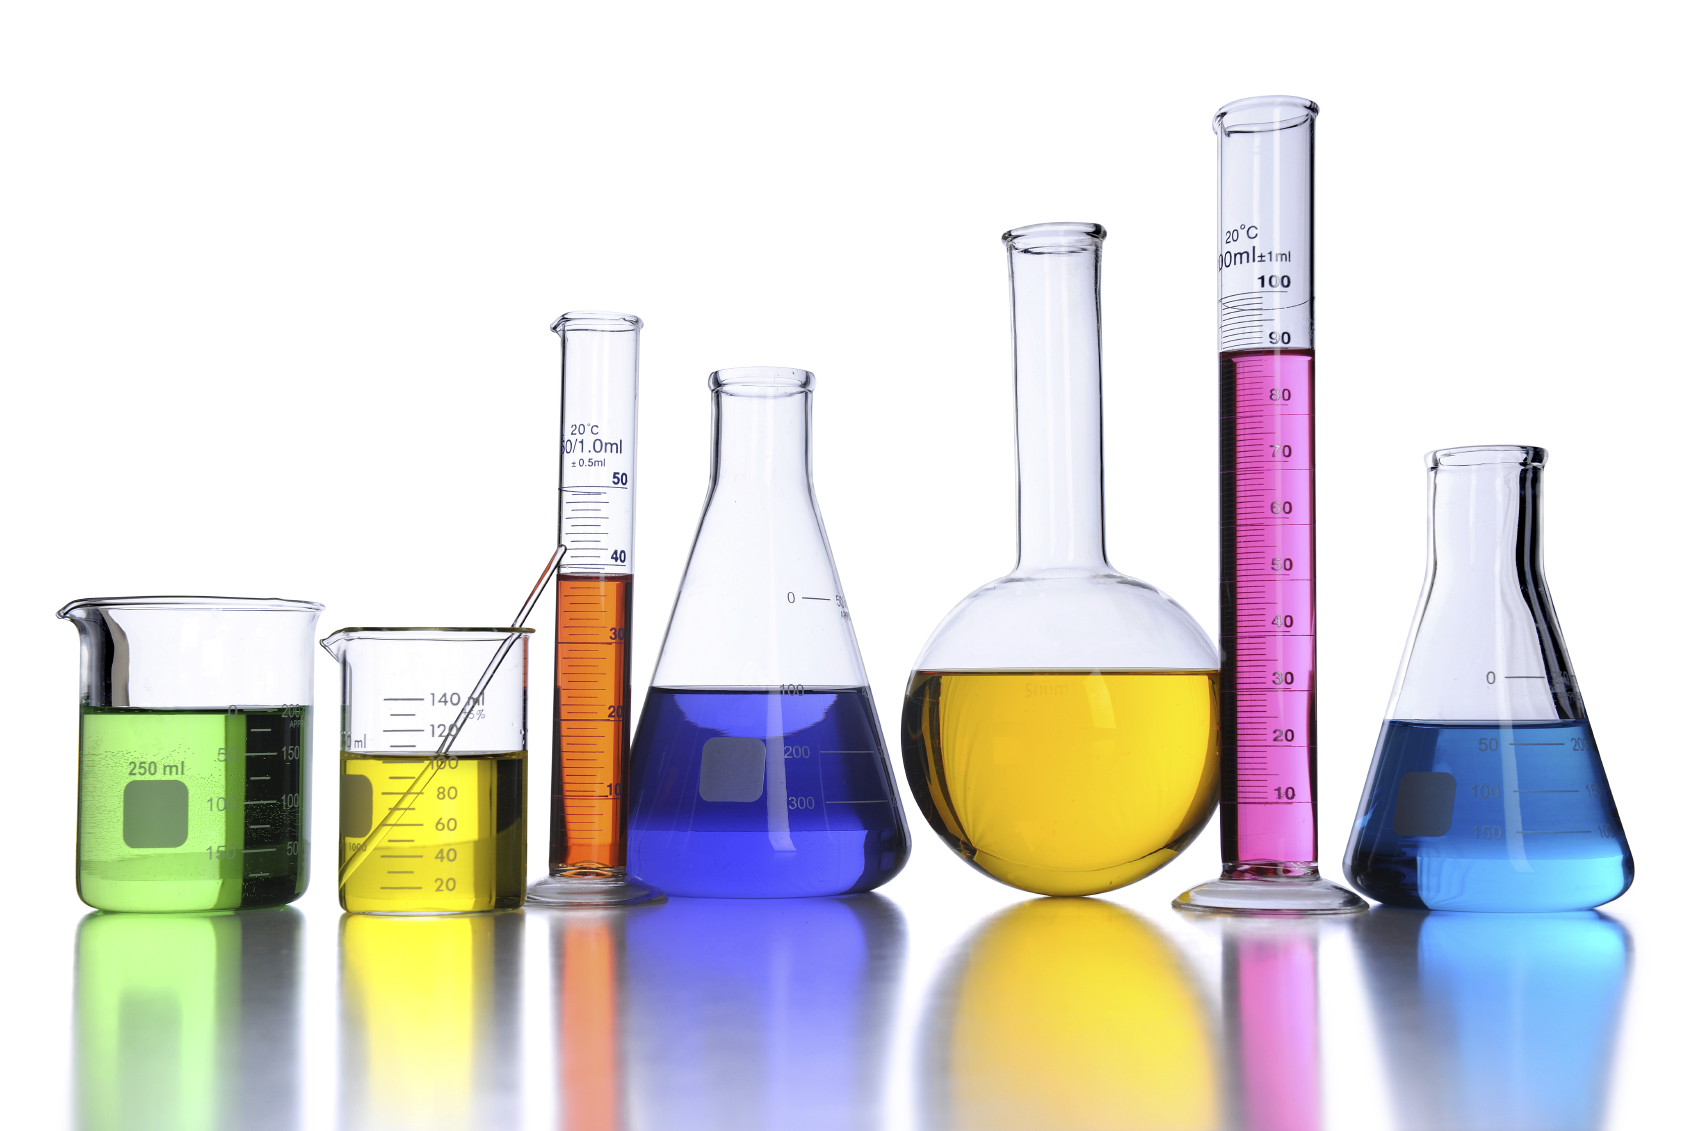 Top 9 Reasons to Start Learning Chemistry | TopTeny.com